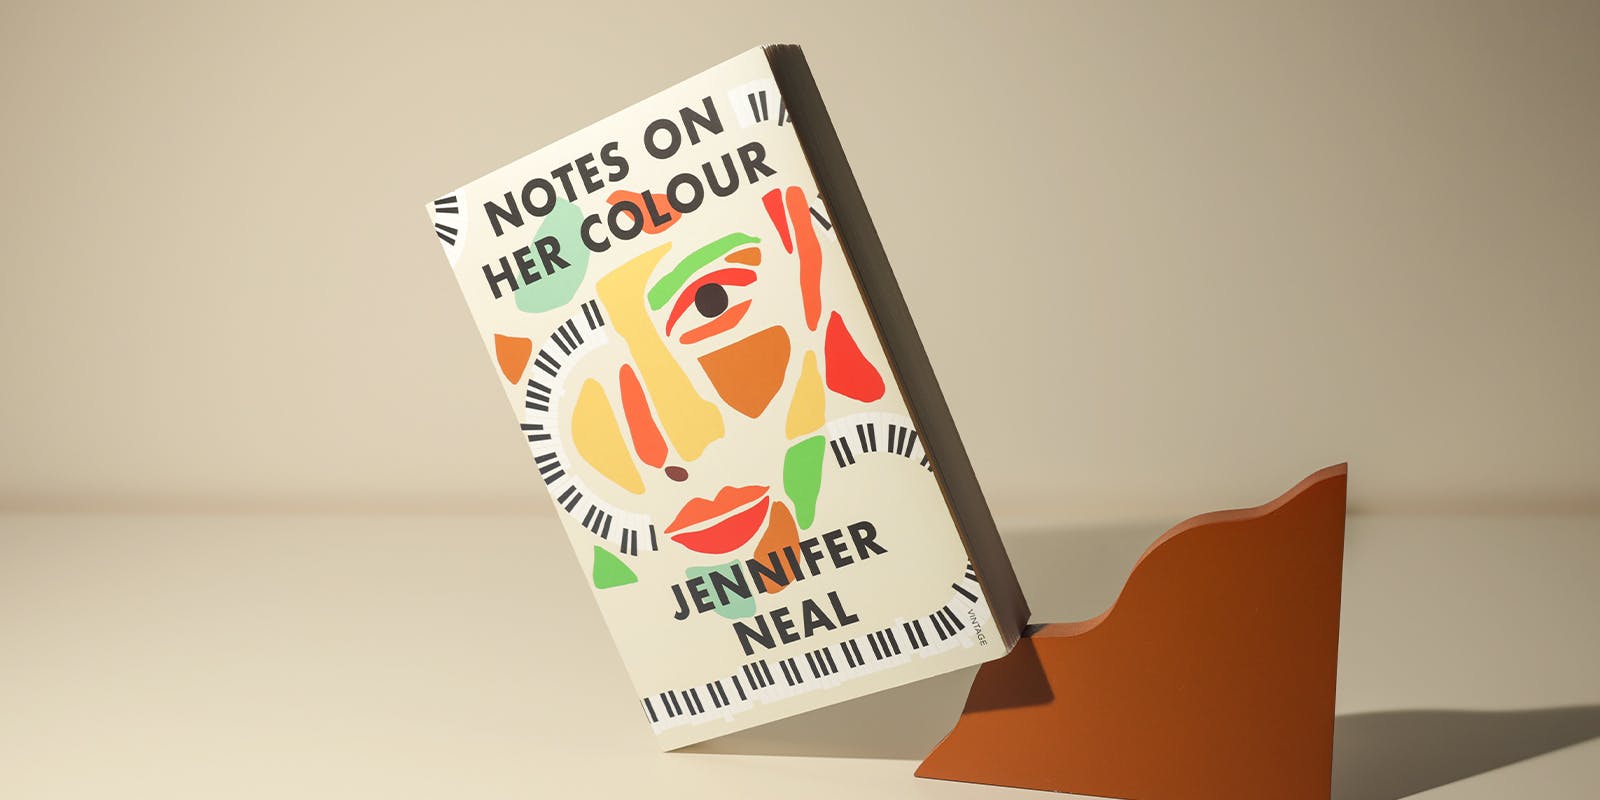 Notes on Her Colour book club questions